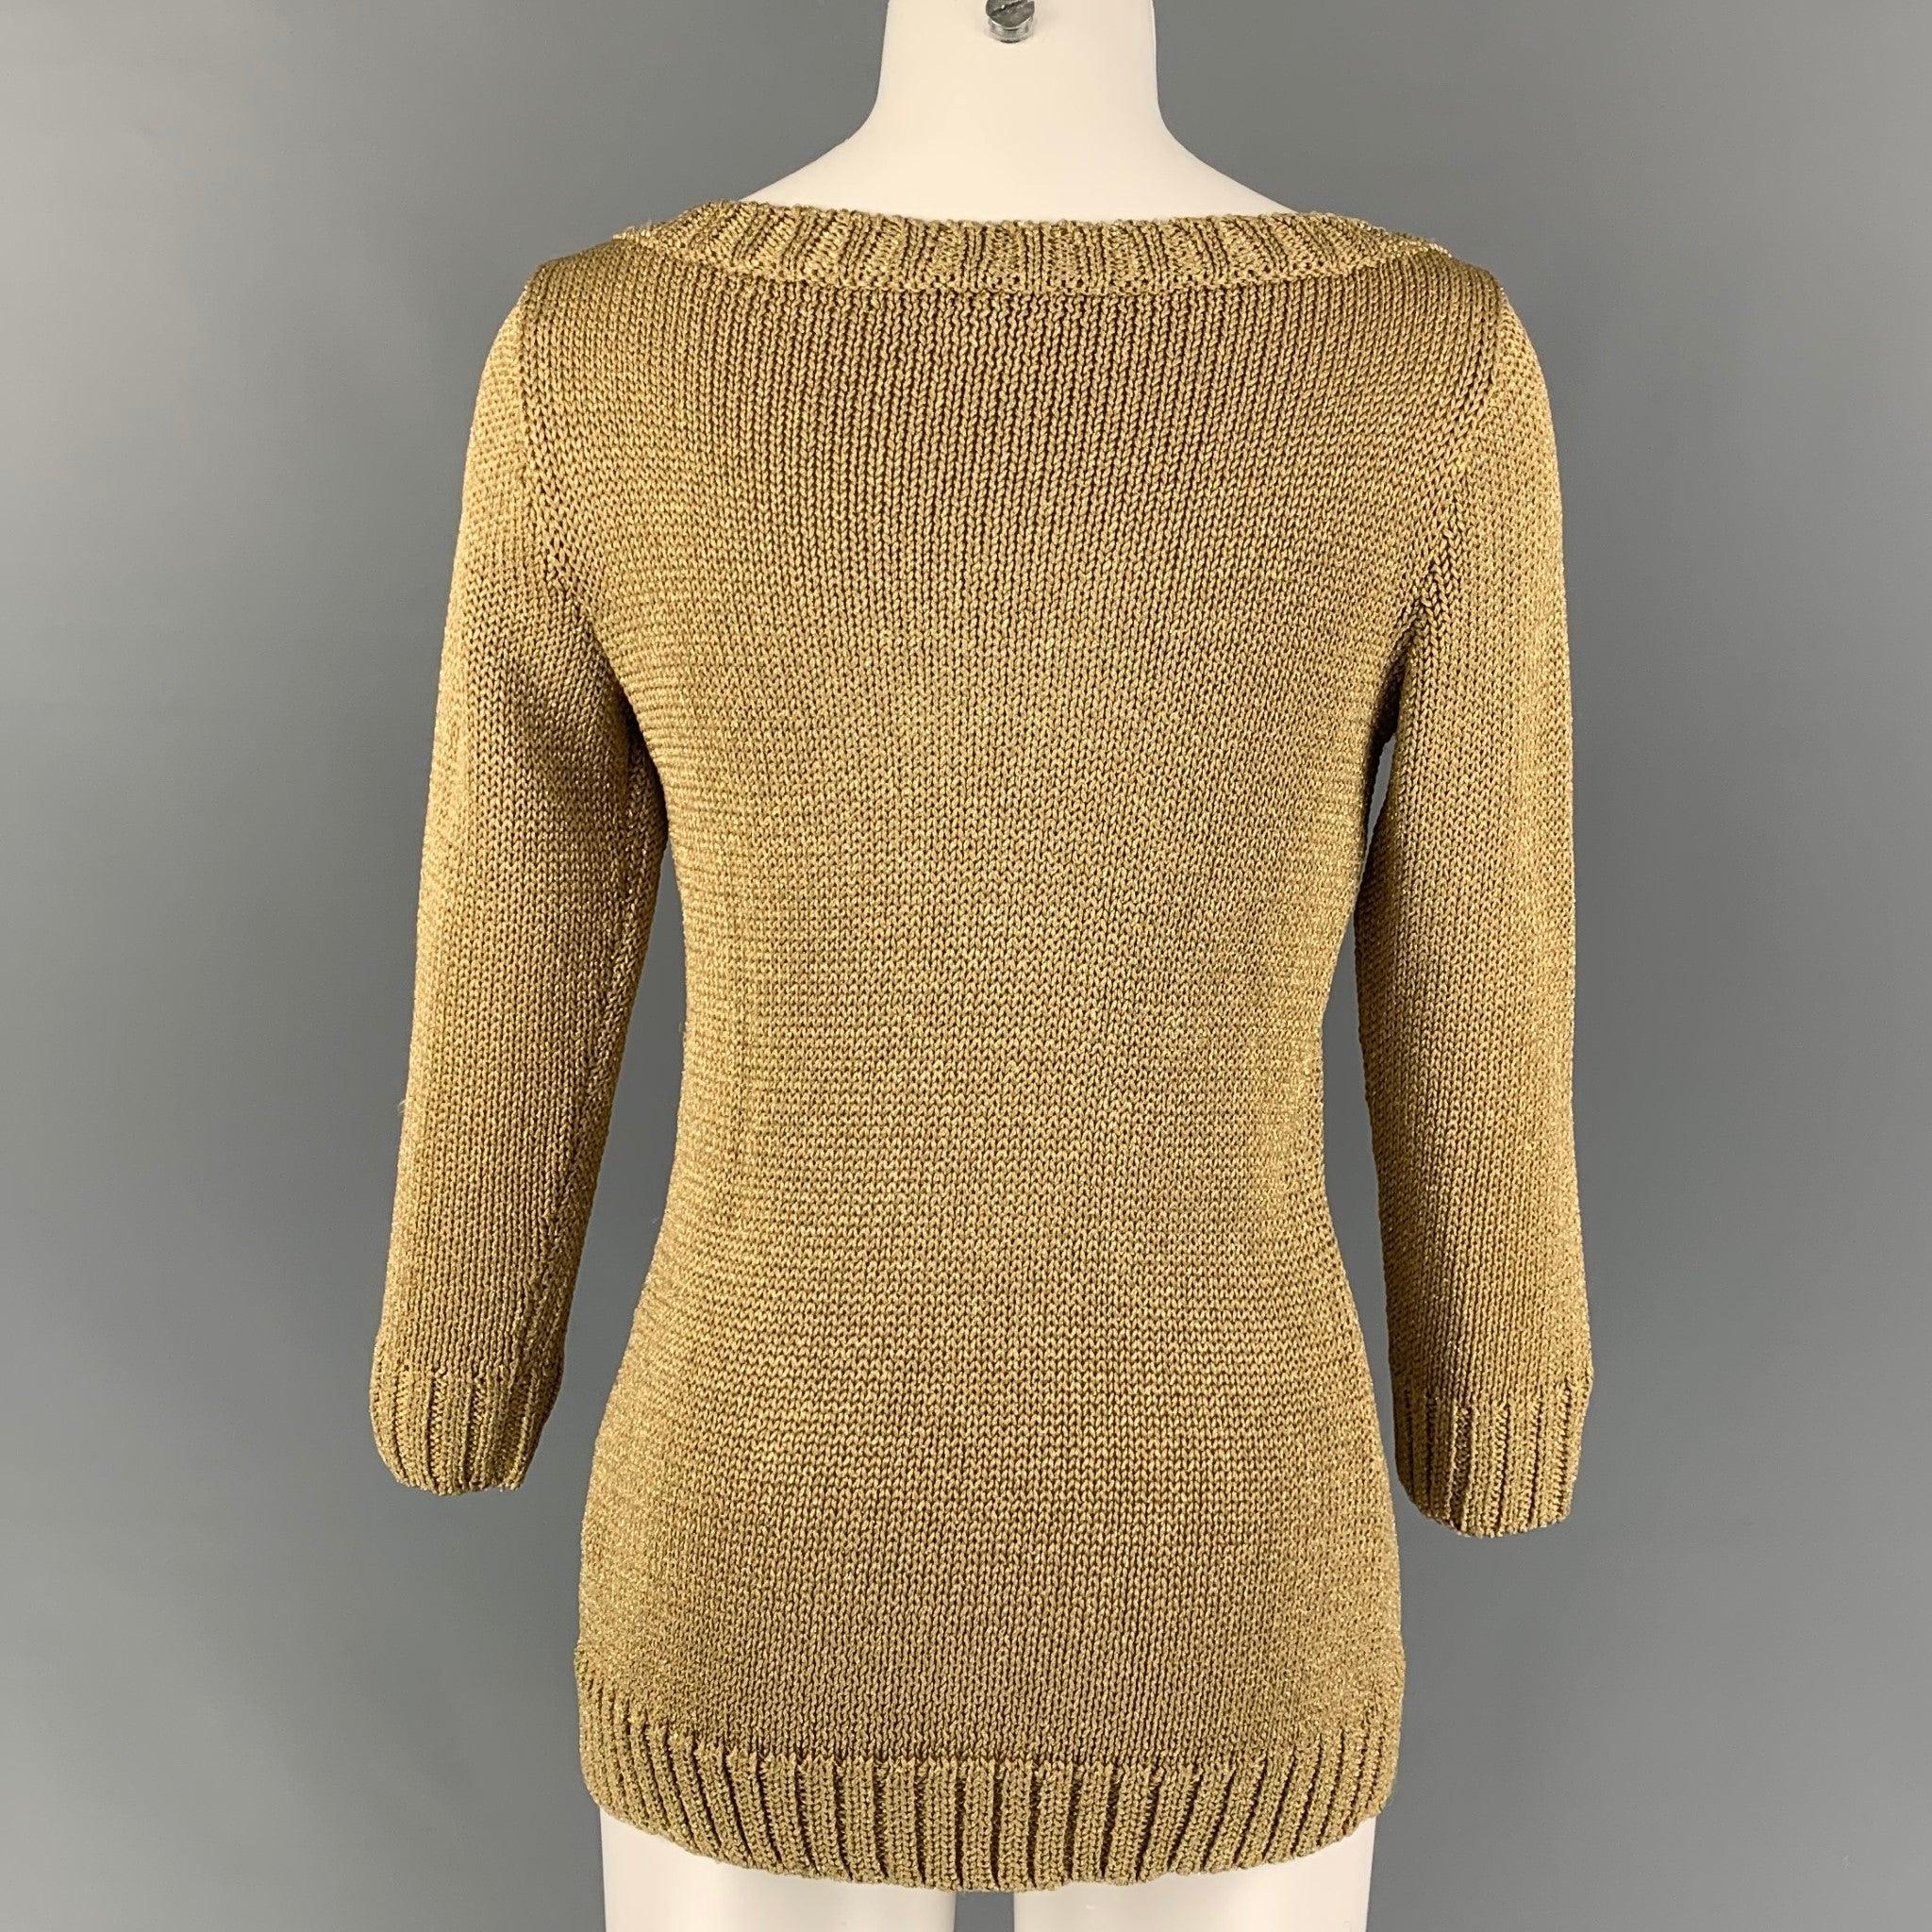 RALPH LAUREN Black Label Size M Gold Viscose Blend Knitted Boat Neck Pullover In Good Condition For Sale In San Francisco, CA